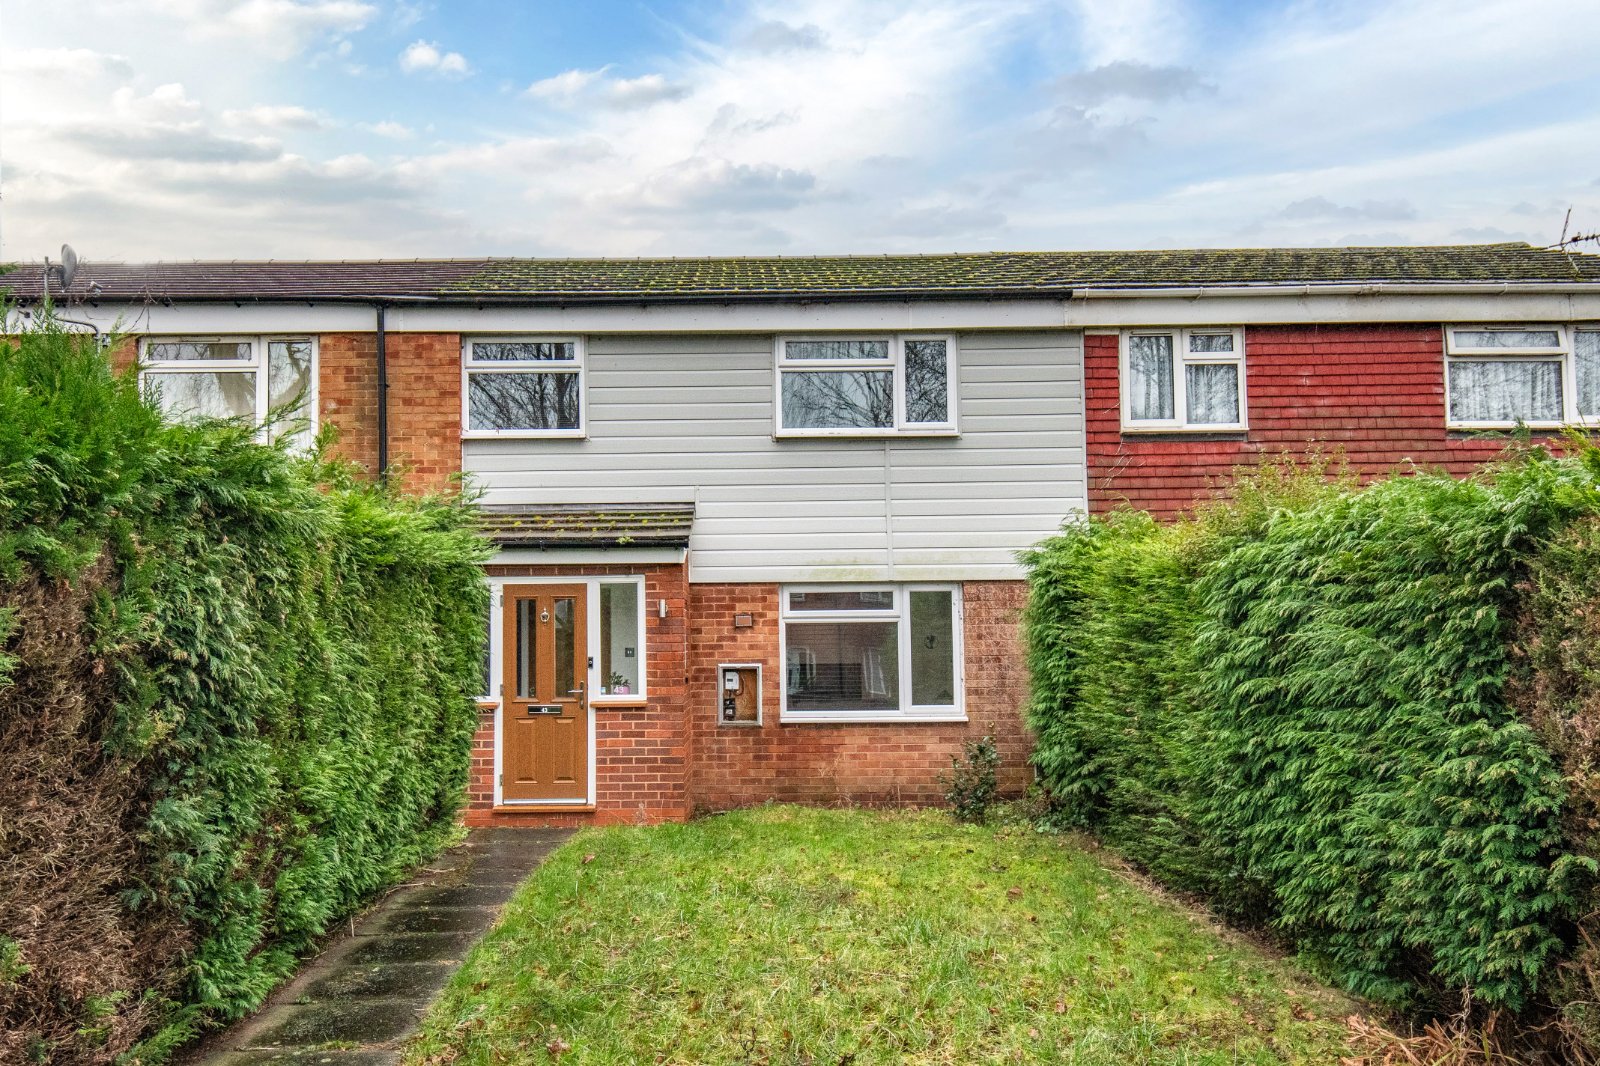 3 bed house for sale in Spenser Walk, Catshill - Property Image 1